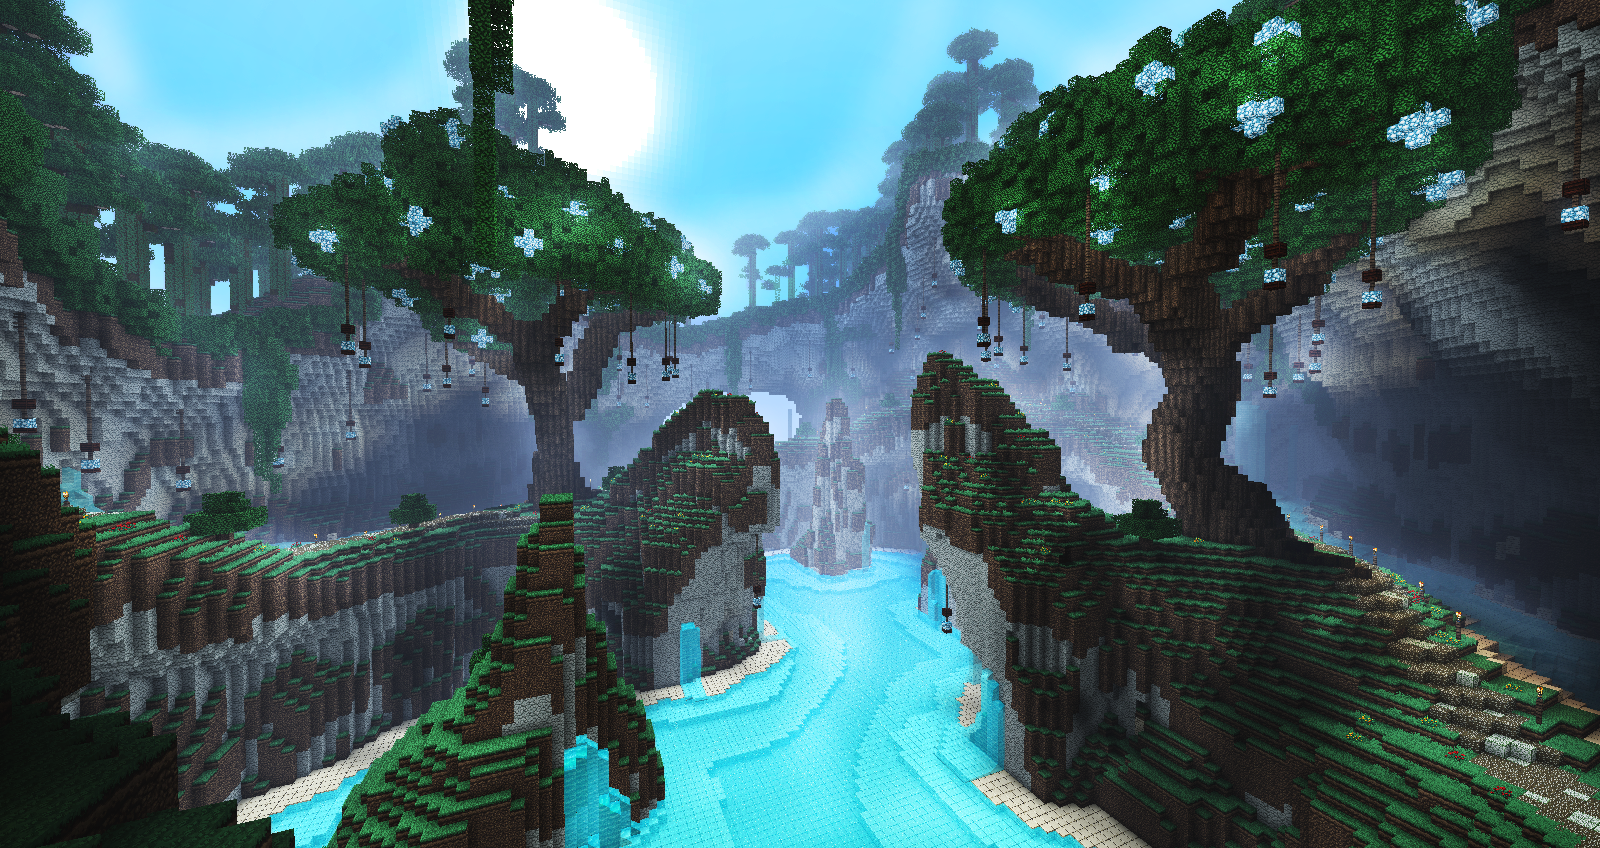 Little+Terraforming.+Built+on+the+Aeries+Minecraft+server+by+Alecdent_8bb0e9_4526160.png